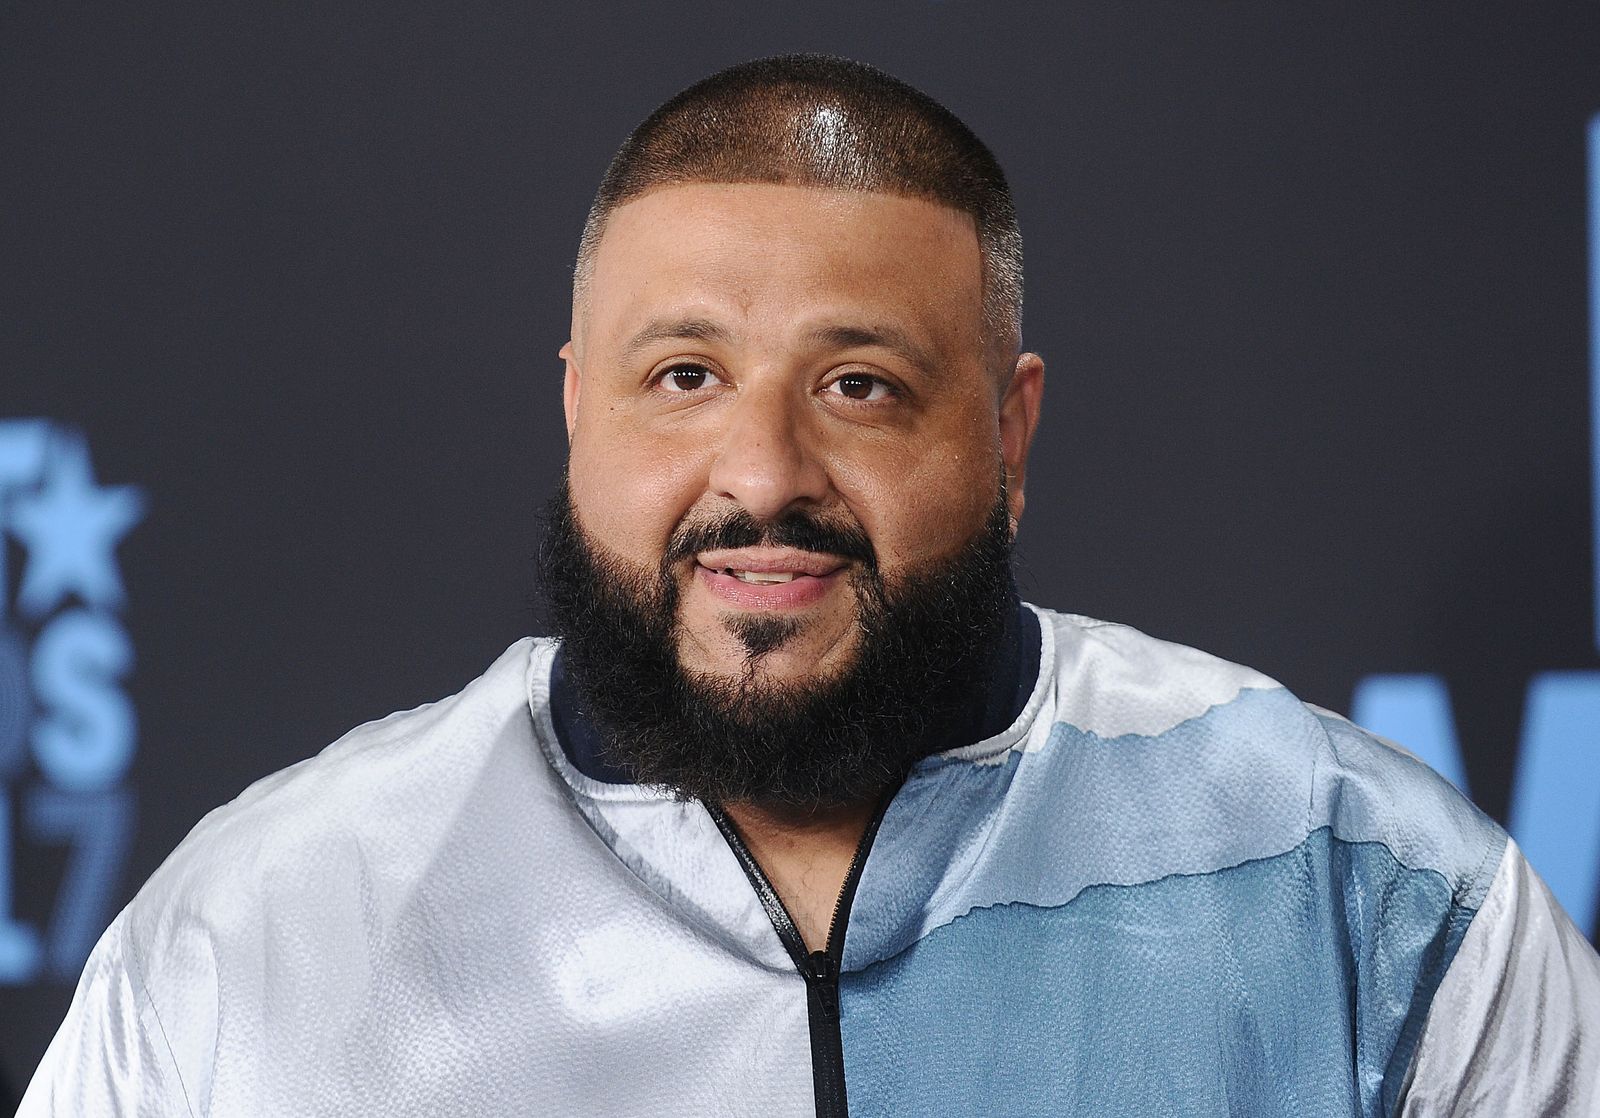 DJ Khaled at the BET Awards at Microsoft Theater on June 25, 2017 | Photo: Getty Images